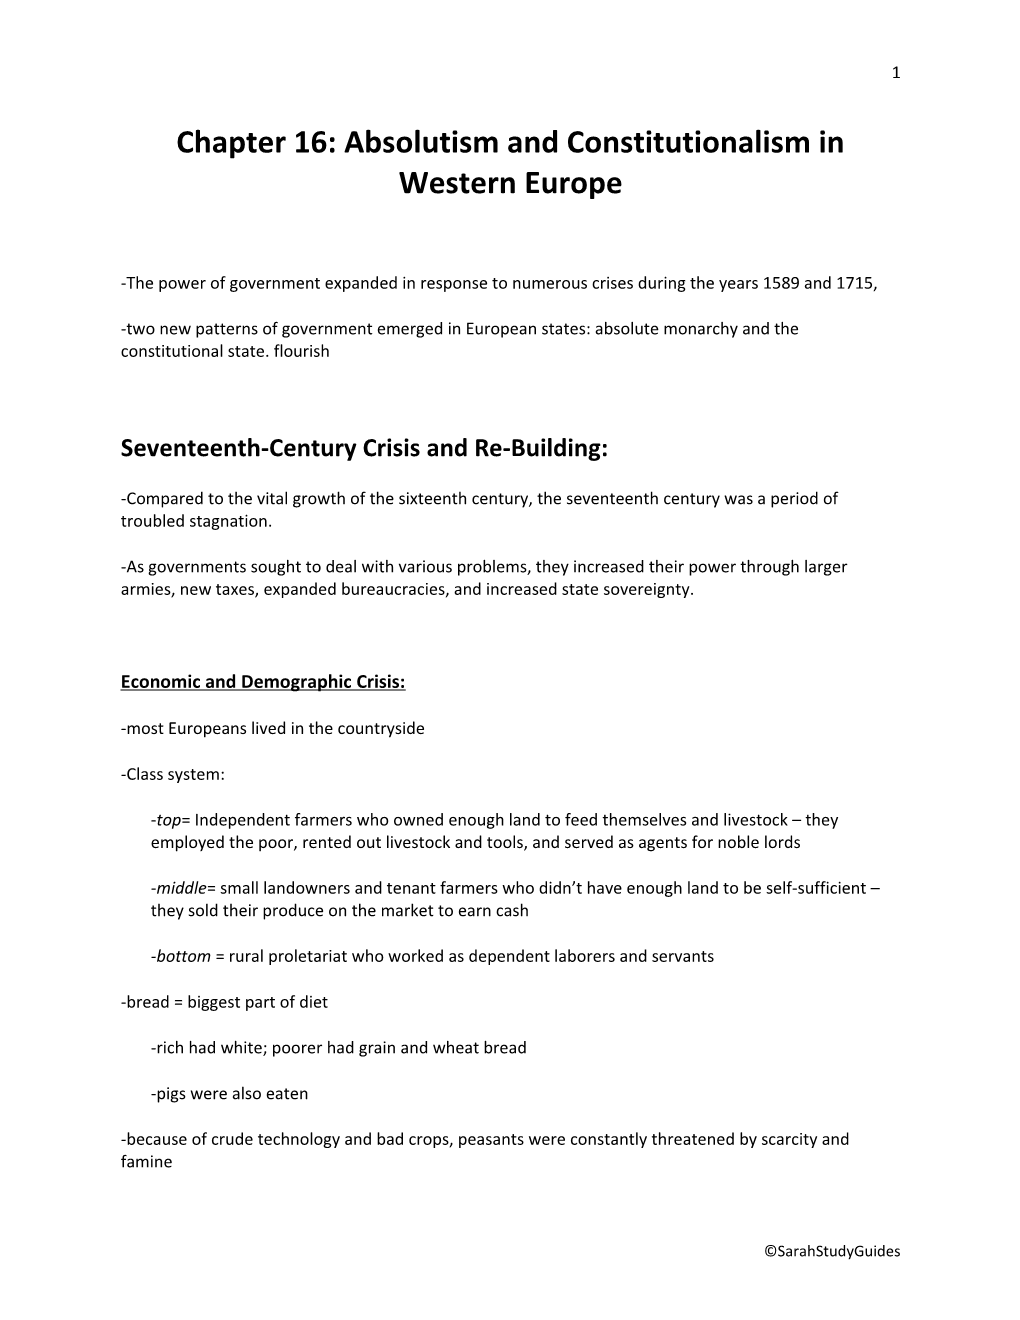 Chapter 16: Absolutism and Constitutionalism in Western Europe